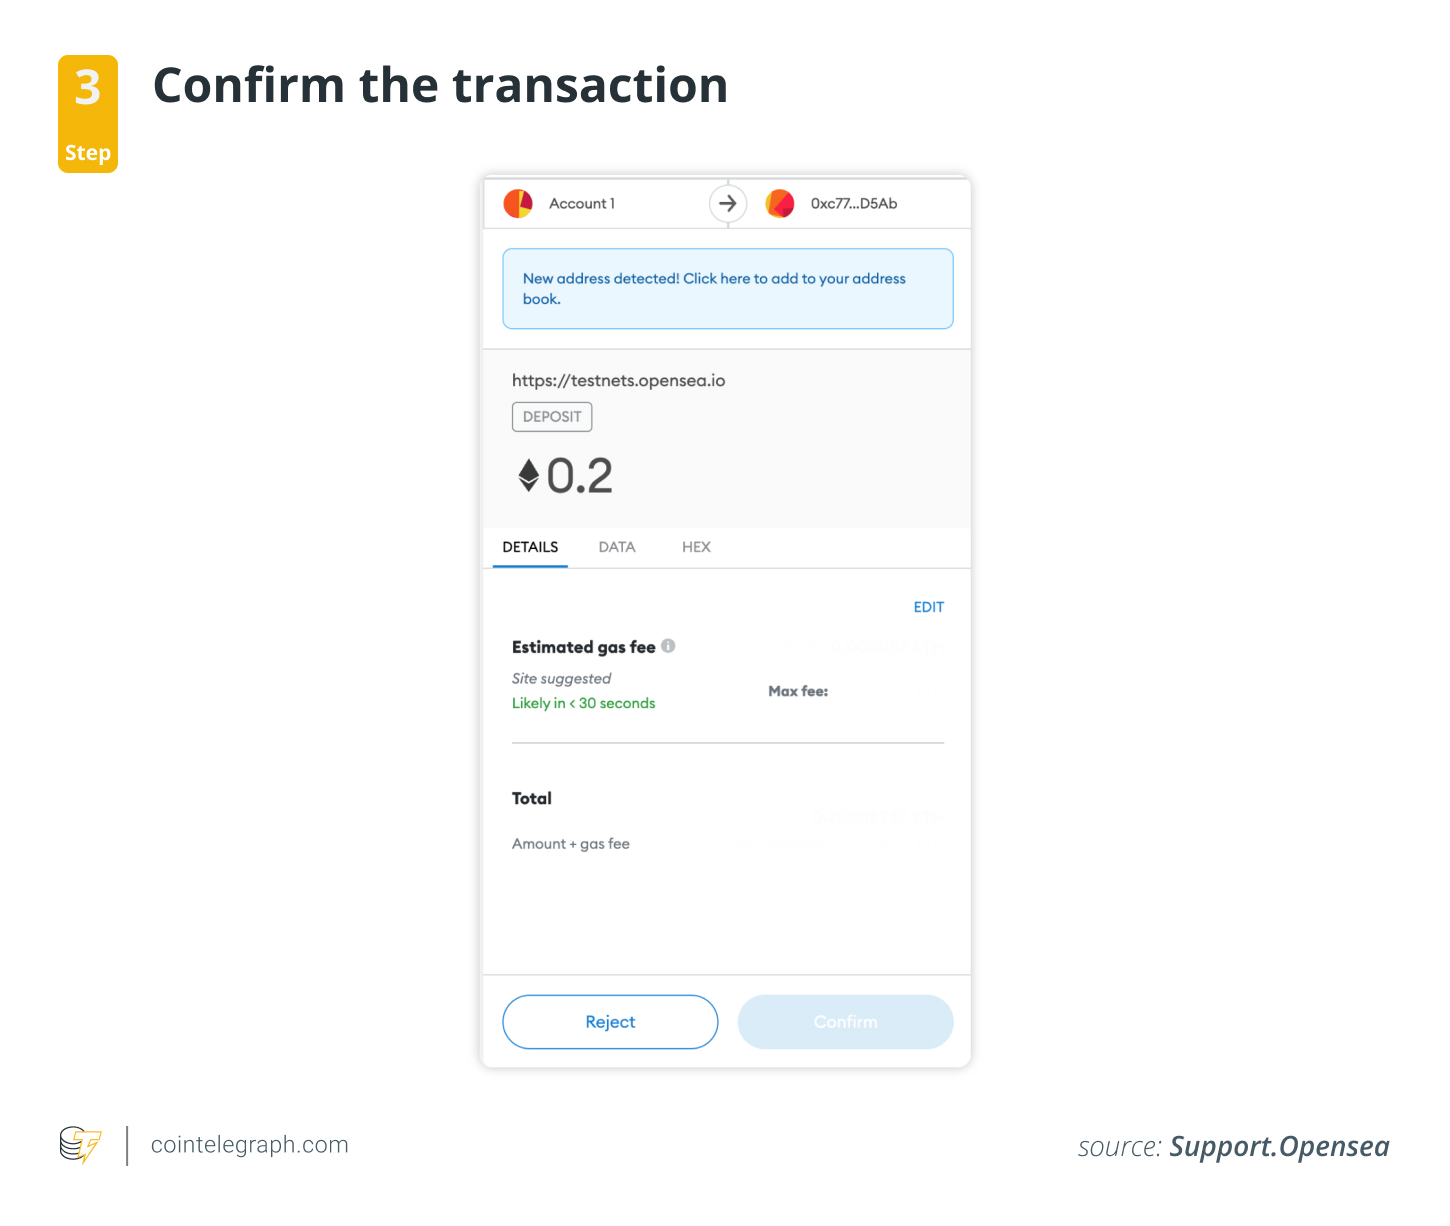 Step 3: Confirm the transaction